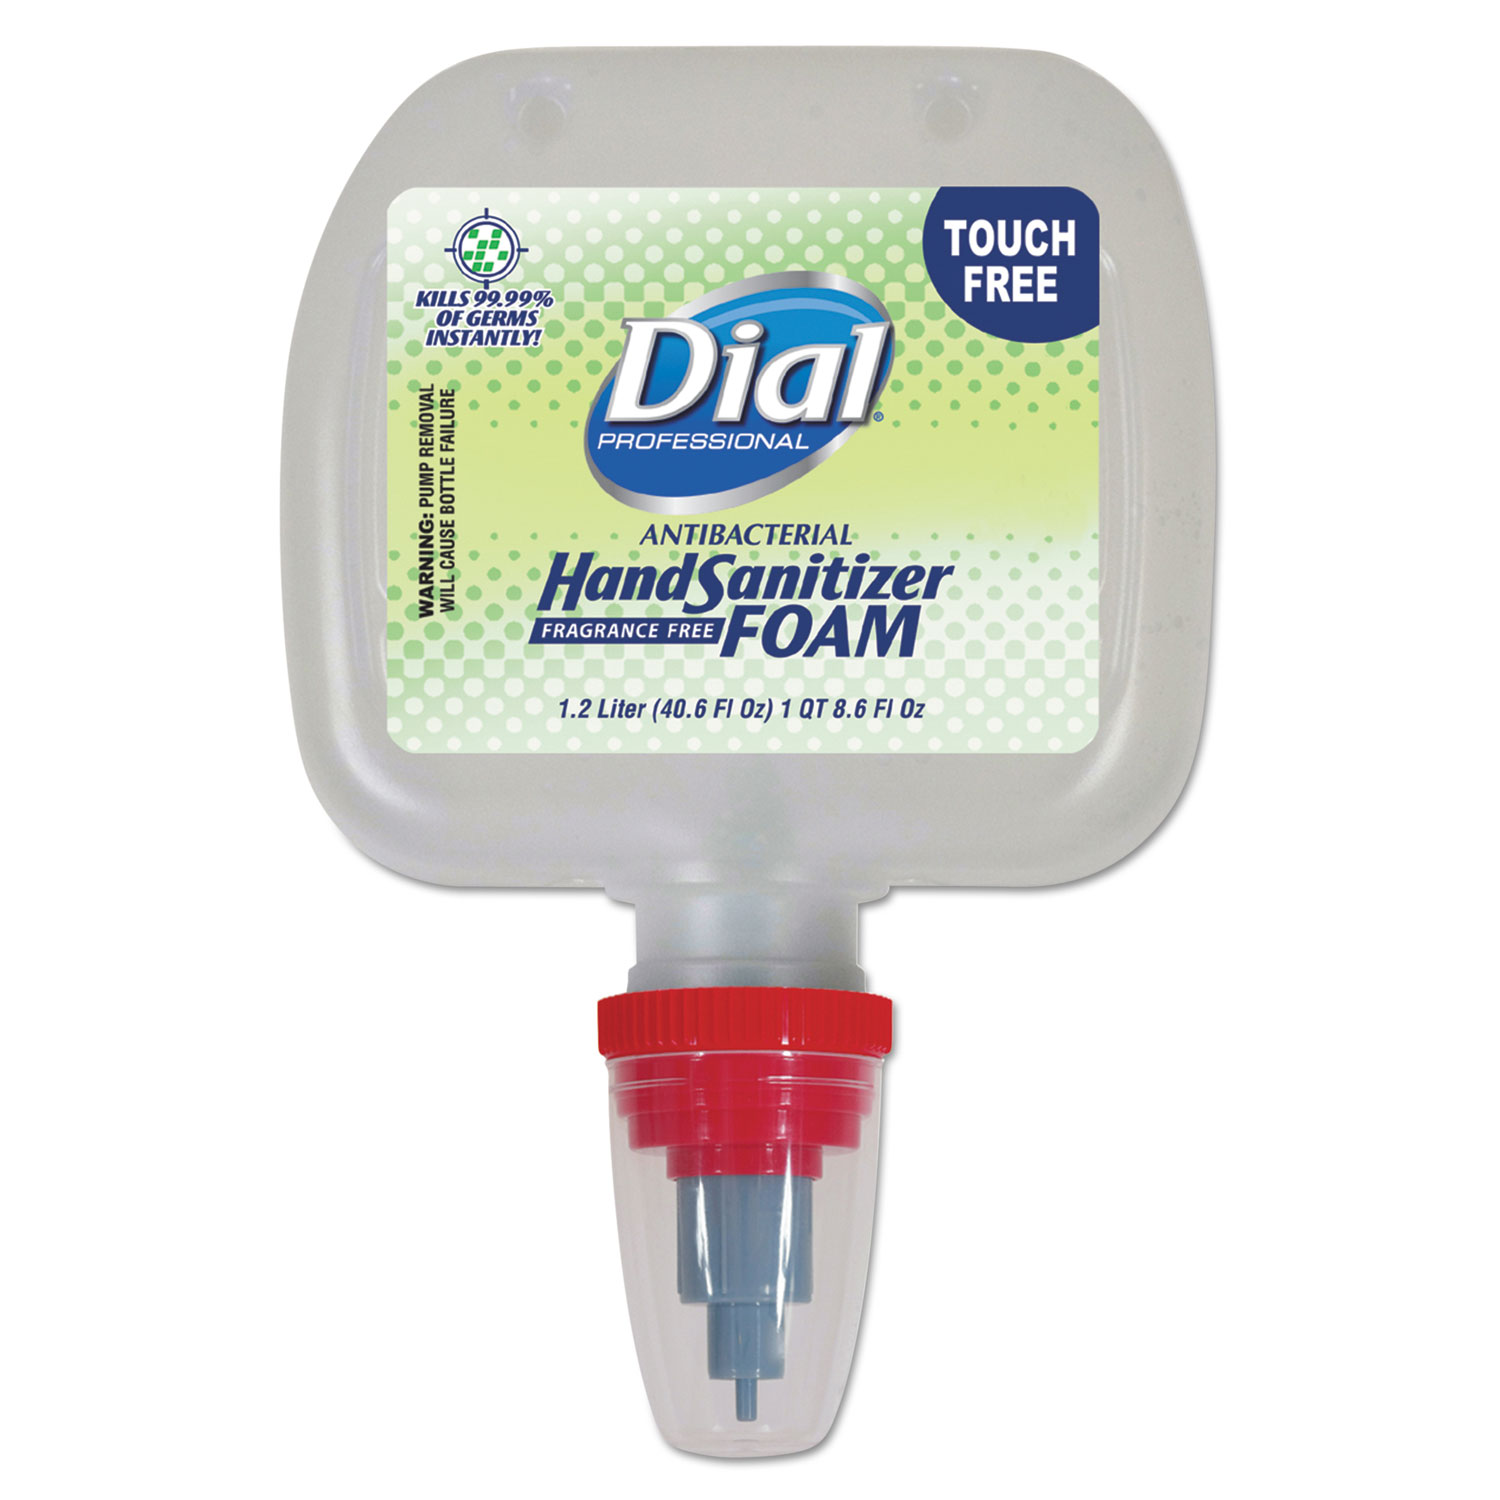  Dial Professional 1700099153 Duo Touch-Free Foaming Hand Sanitizer Refill, 1.2 L, Fragrance-Free, 3/Carton (DIA99153) 